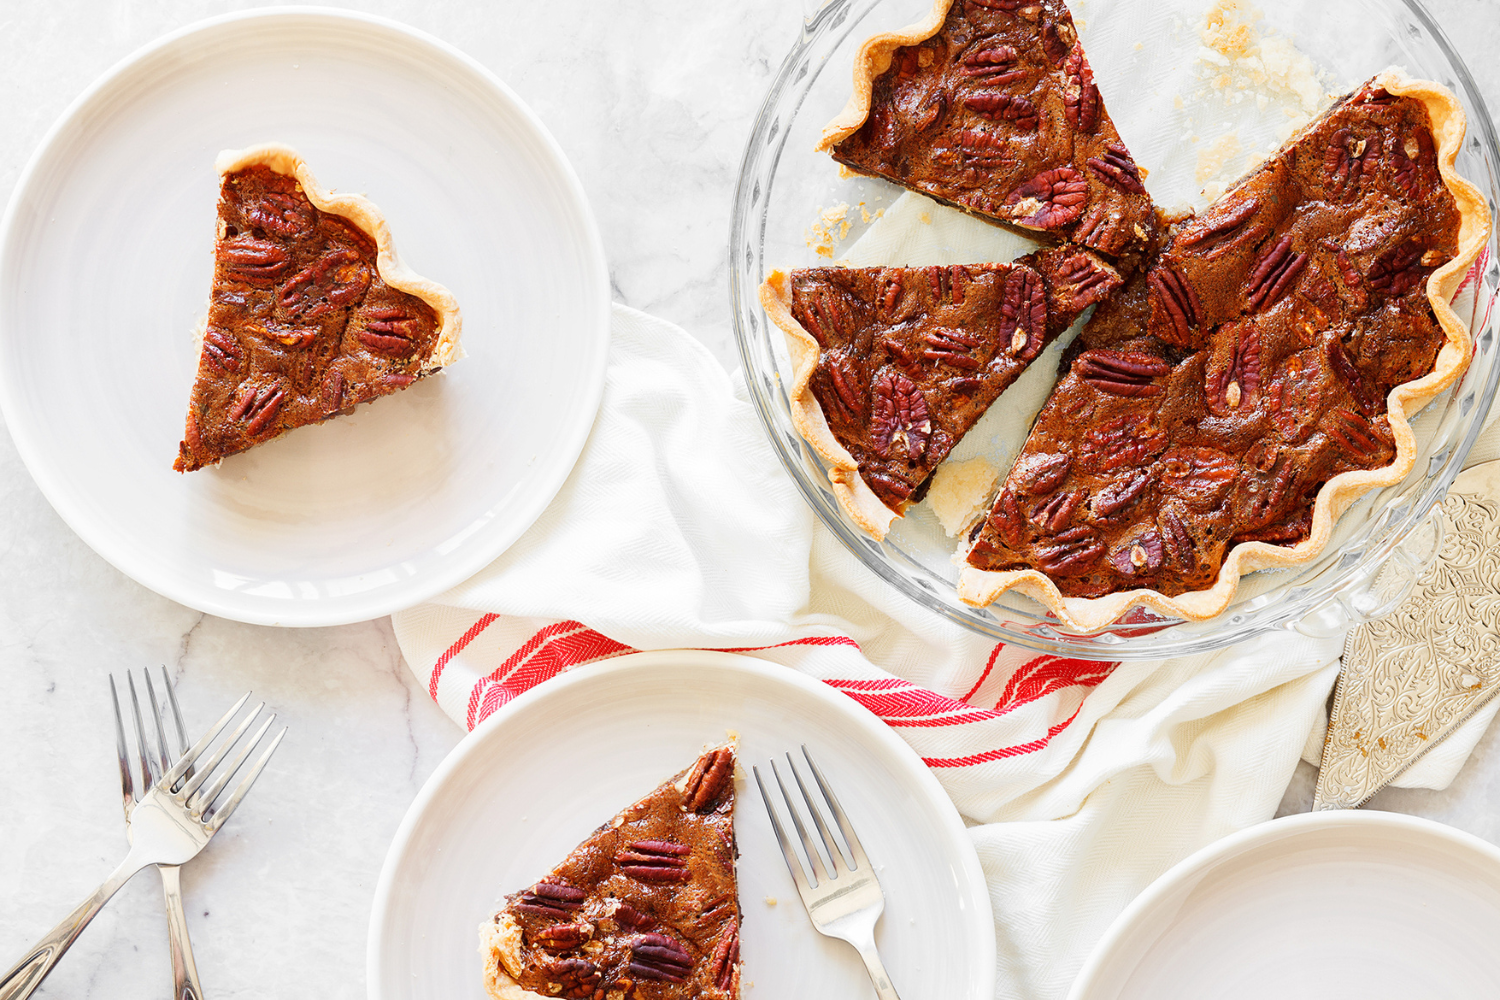 slices of chocolate pecan pie being served onto plates